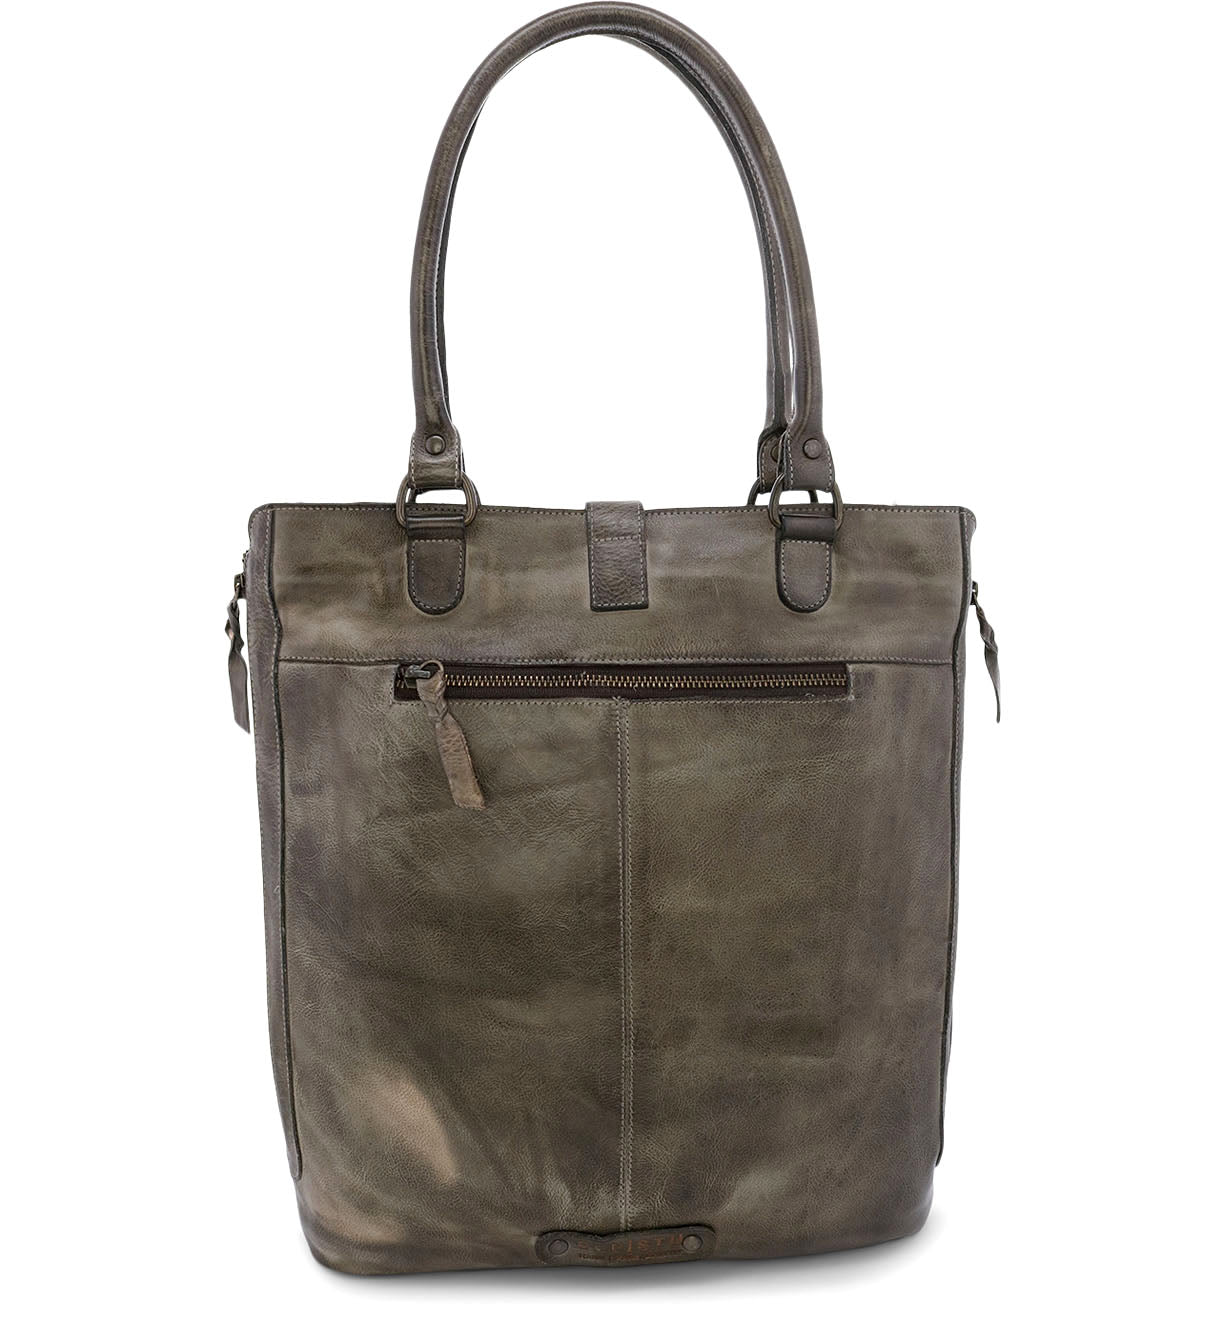 The Mildred by Bed Stu women's grey leather tote bag.